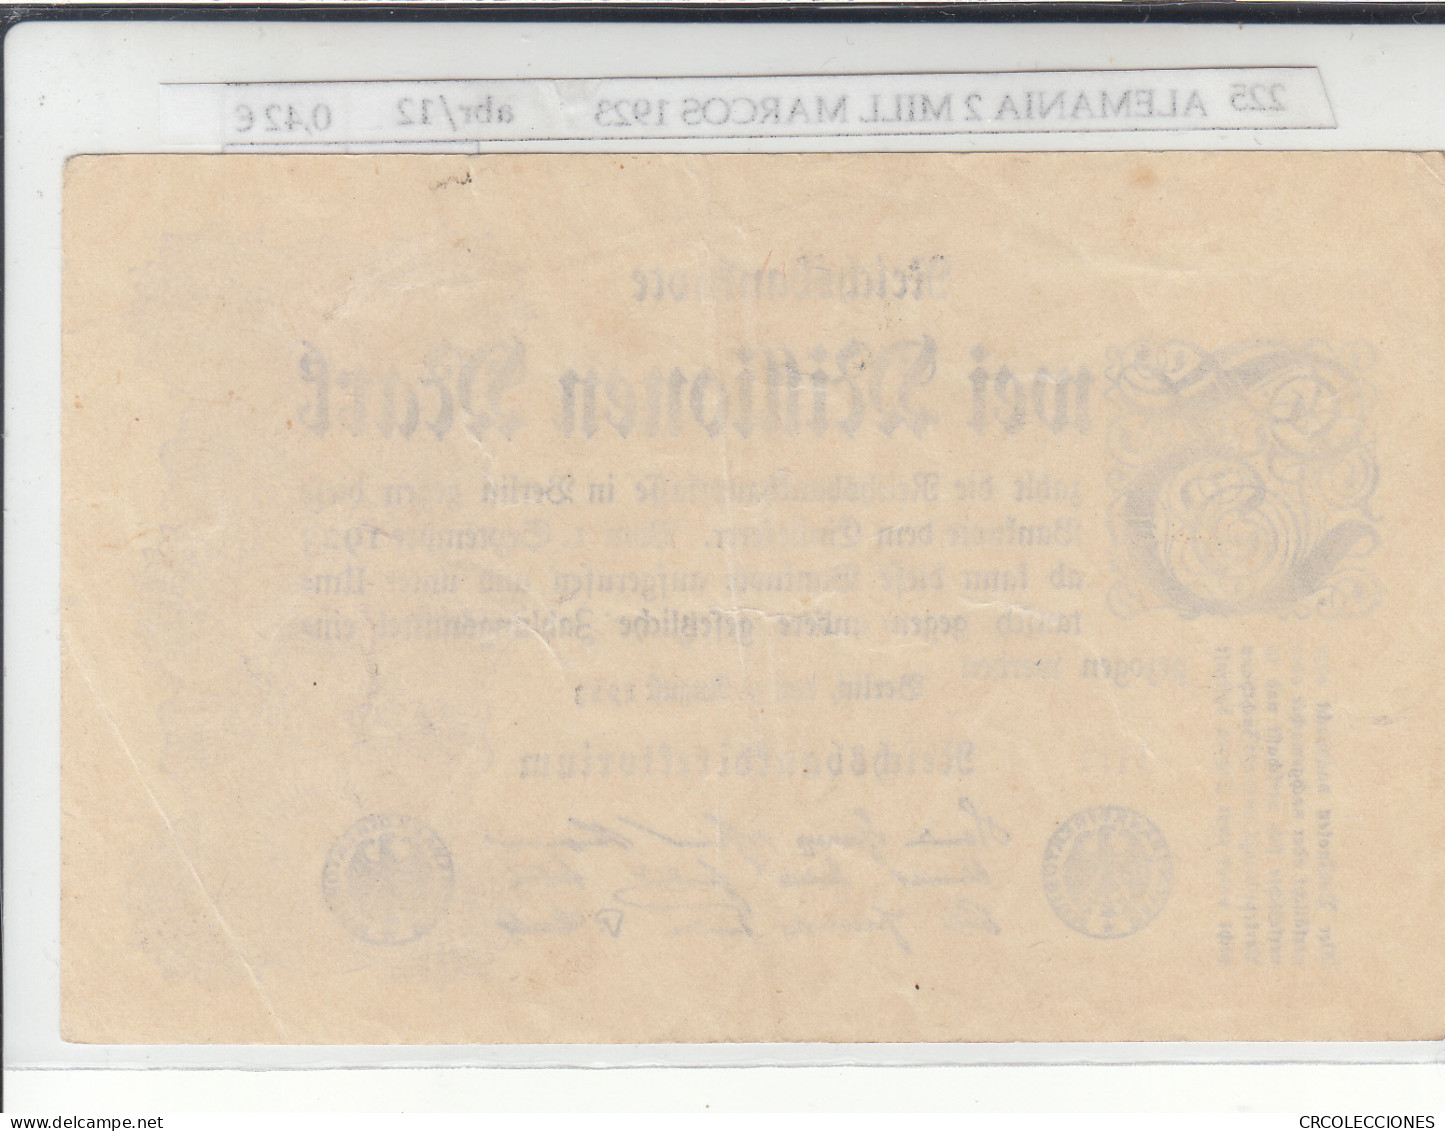 BILLETE ALEMANIA 2 MILLONES MARCOS 1923 P-104a.1 - Other - Europe